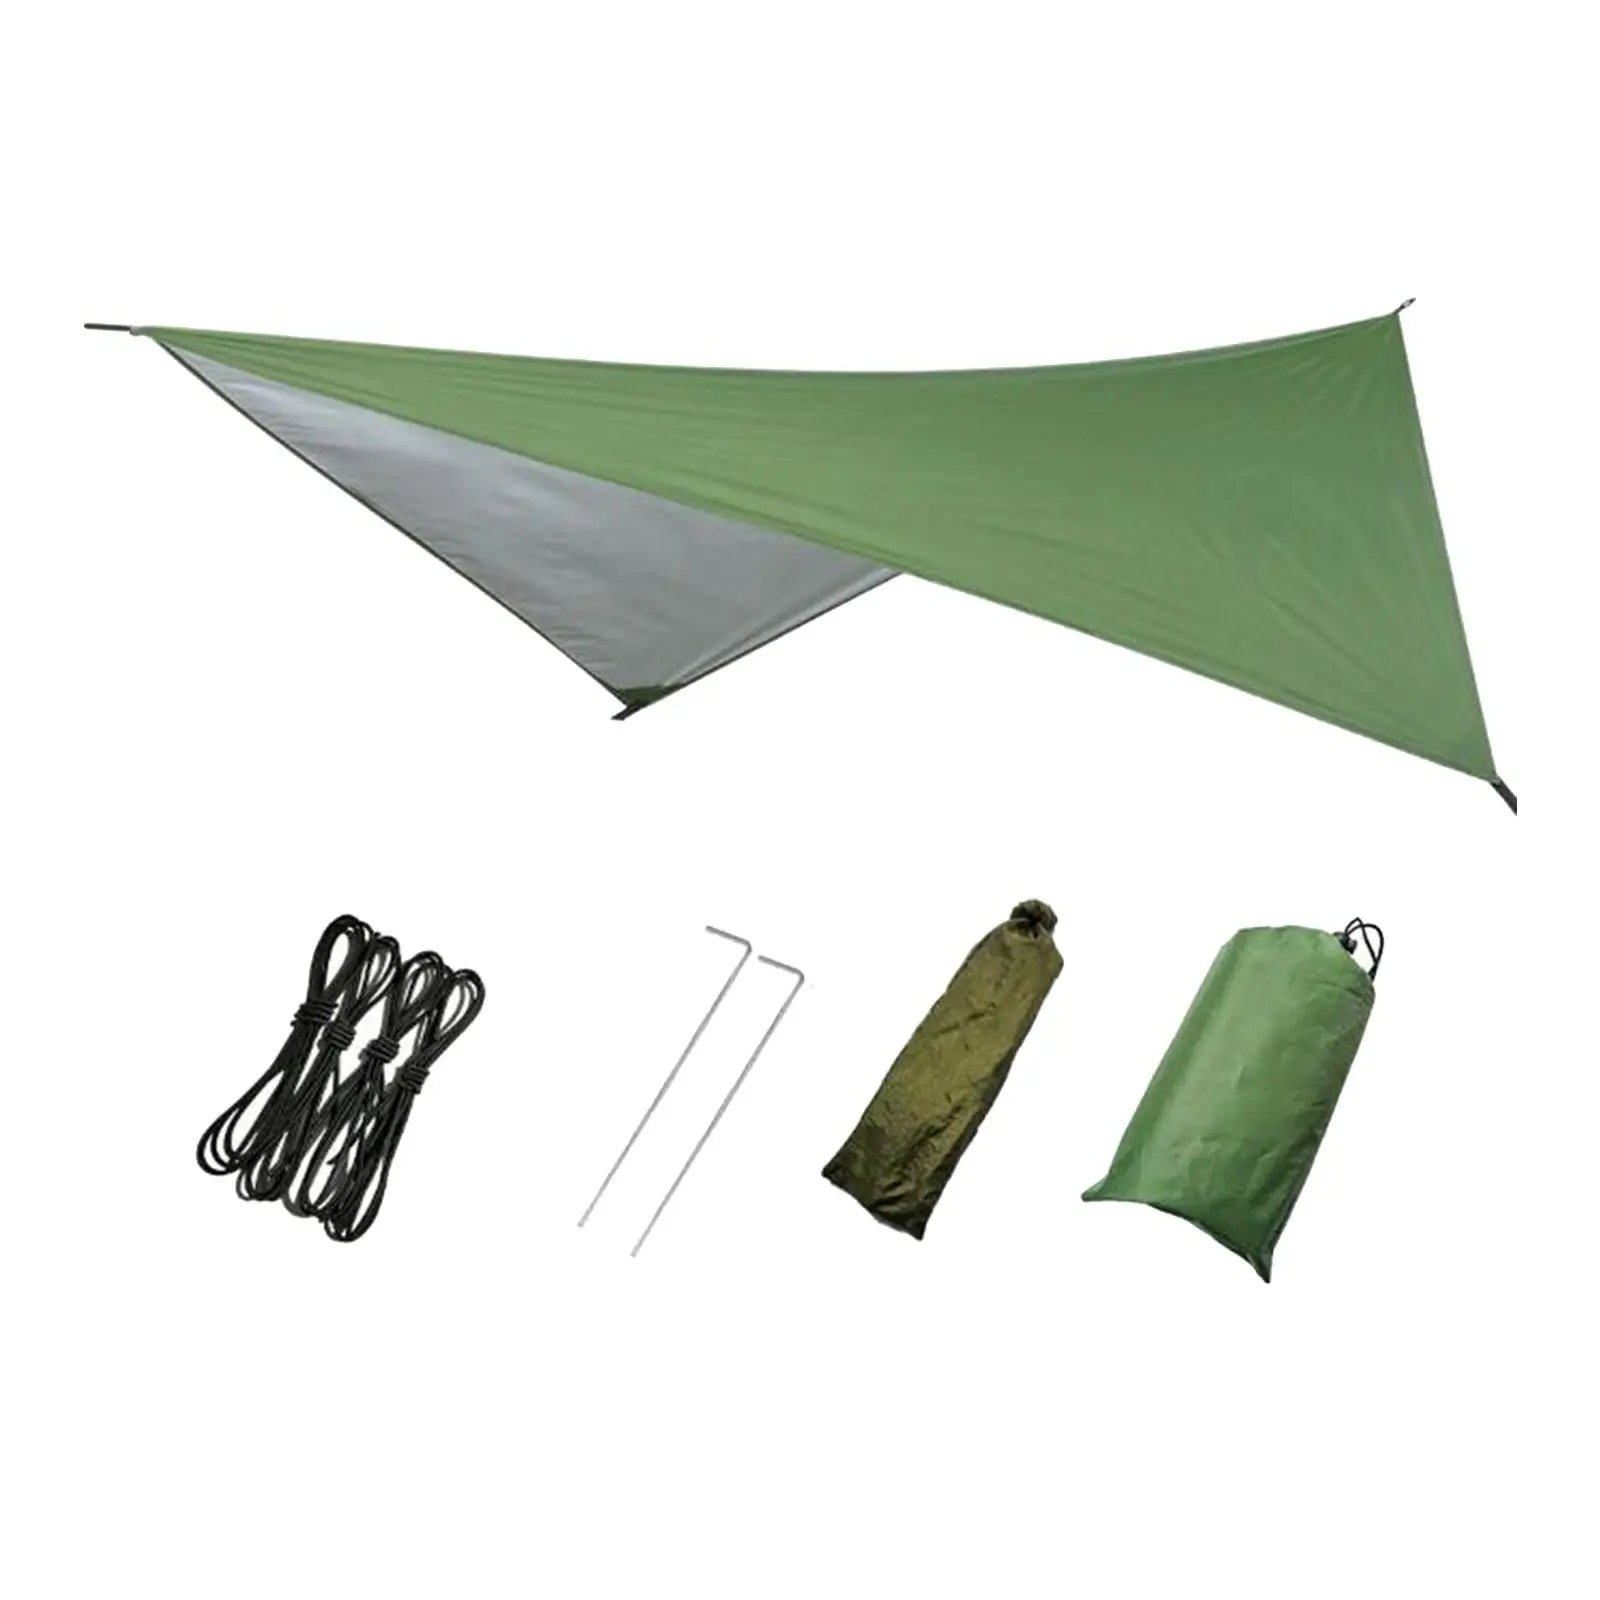 Heavy Duty Camping Tent Tarp Awning  Beach Umbrella Windproof Outdoor Sun  for Fishing Hiking Beach Traveling Picnic